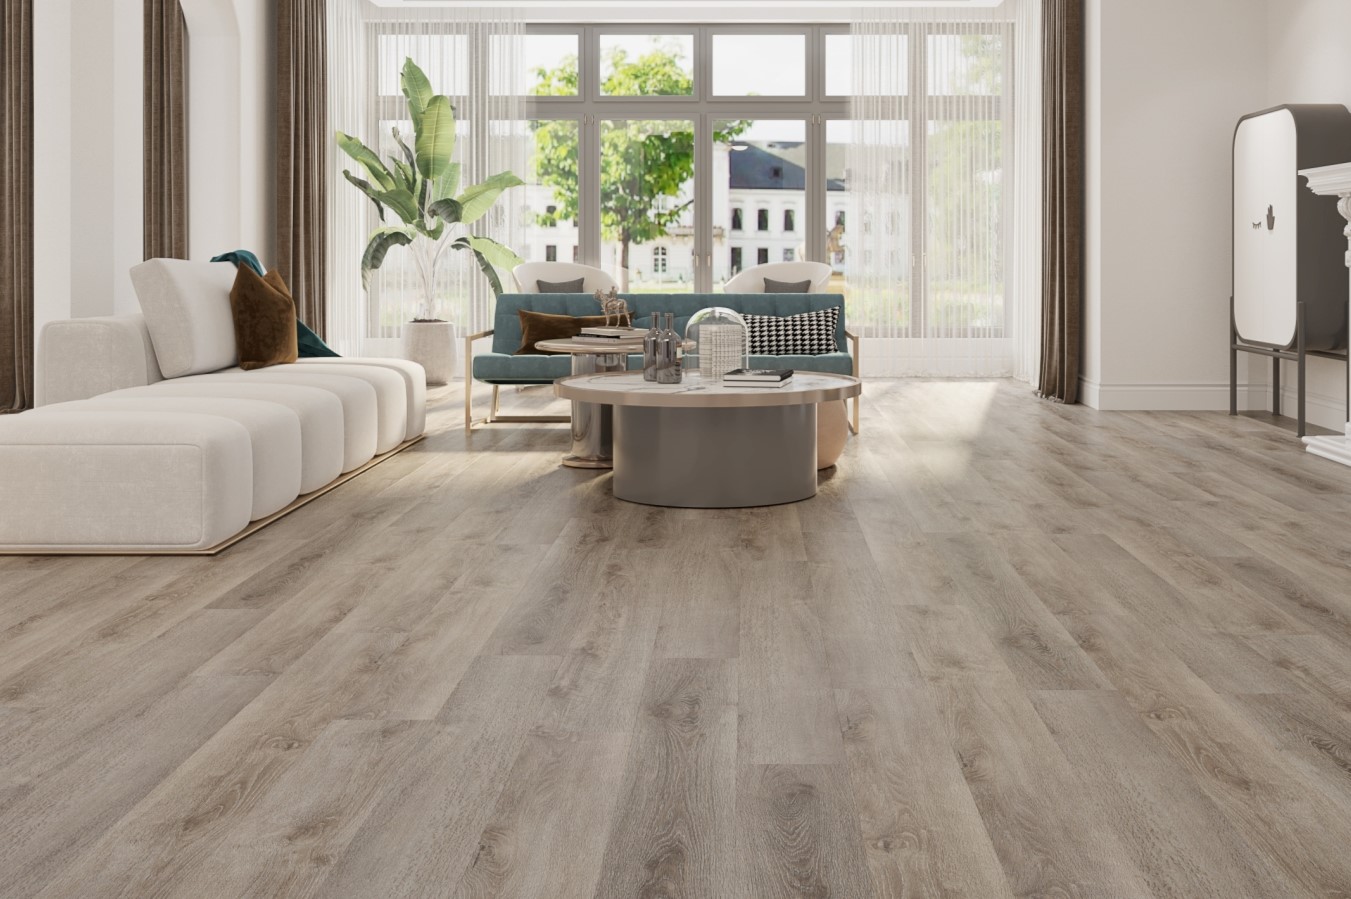 What Do You Know About SPC Flooring?